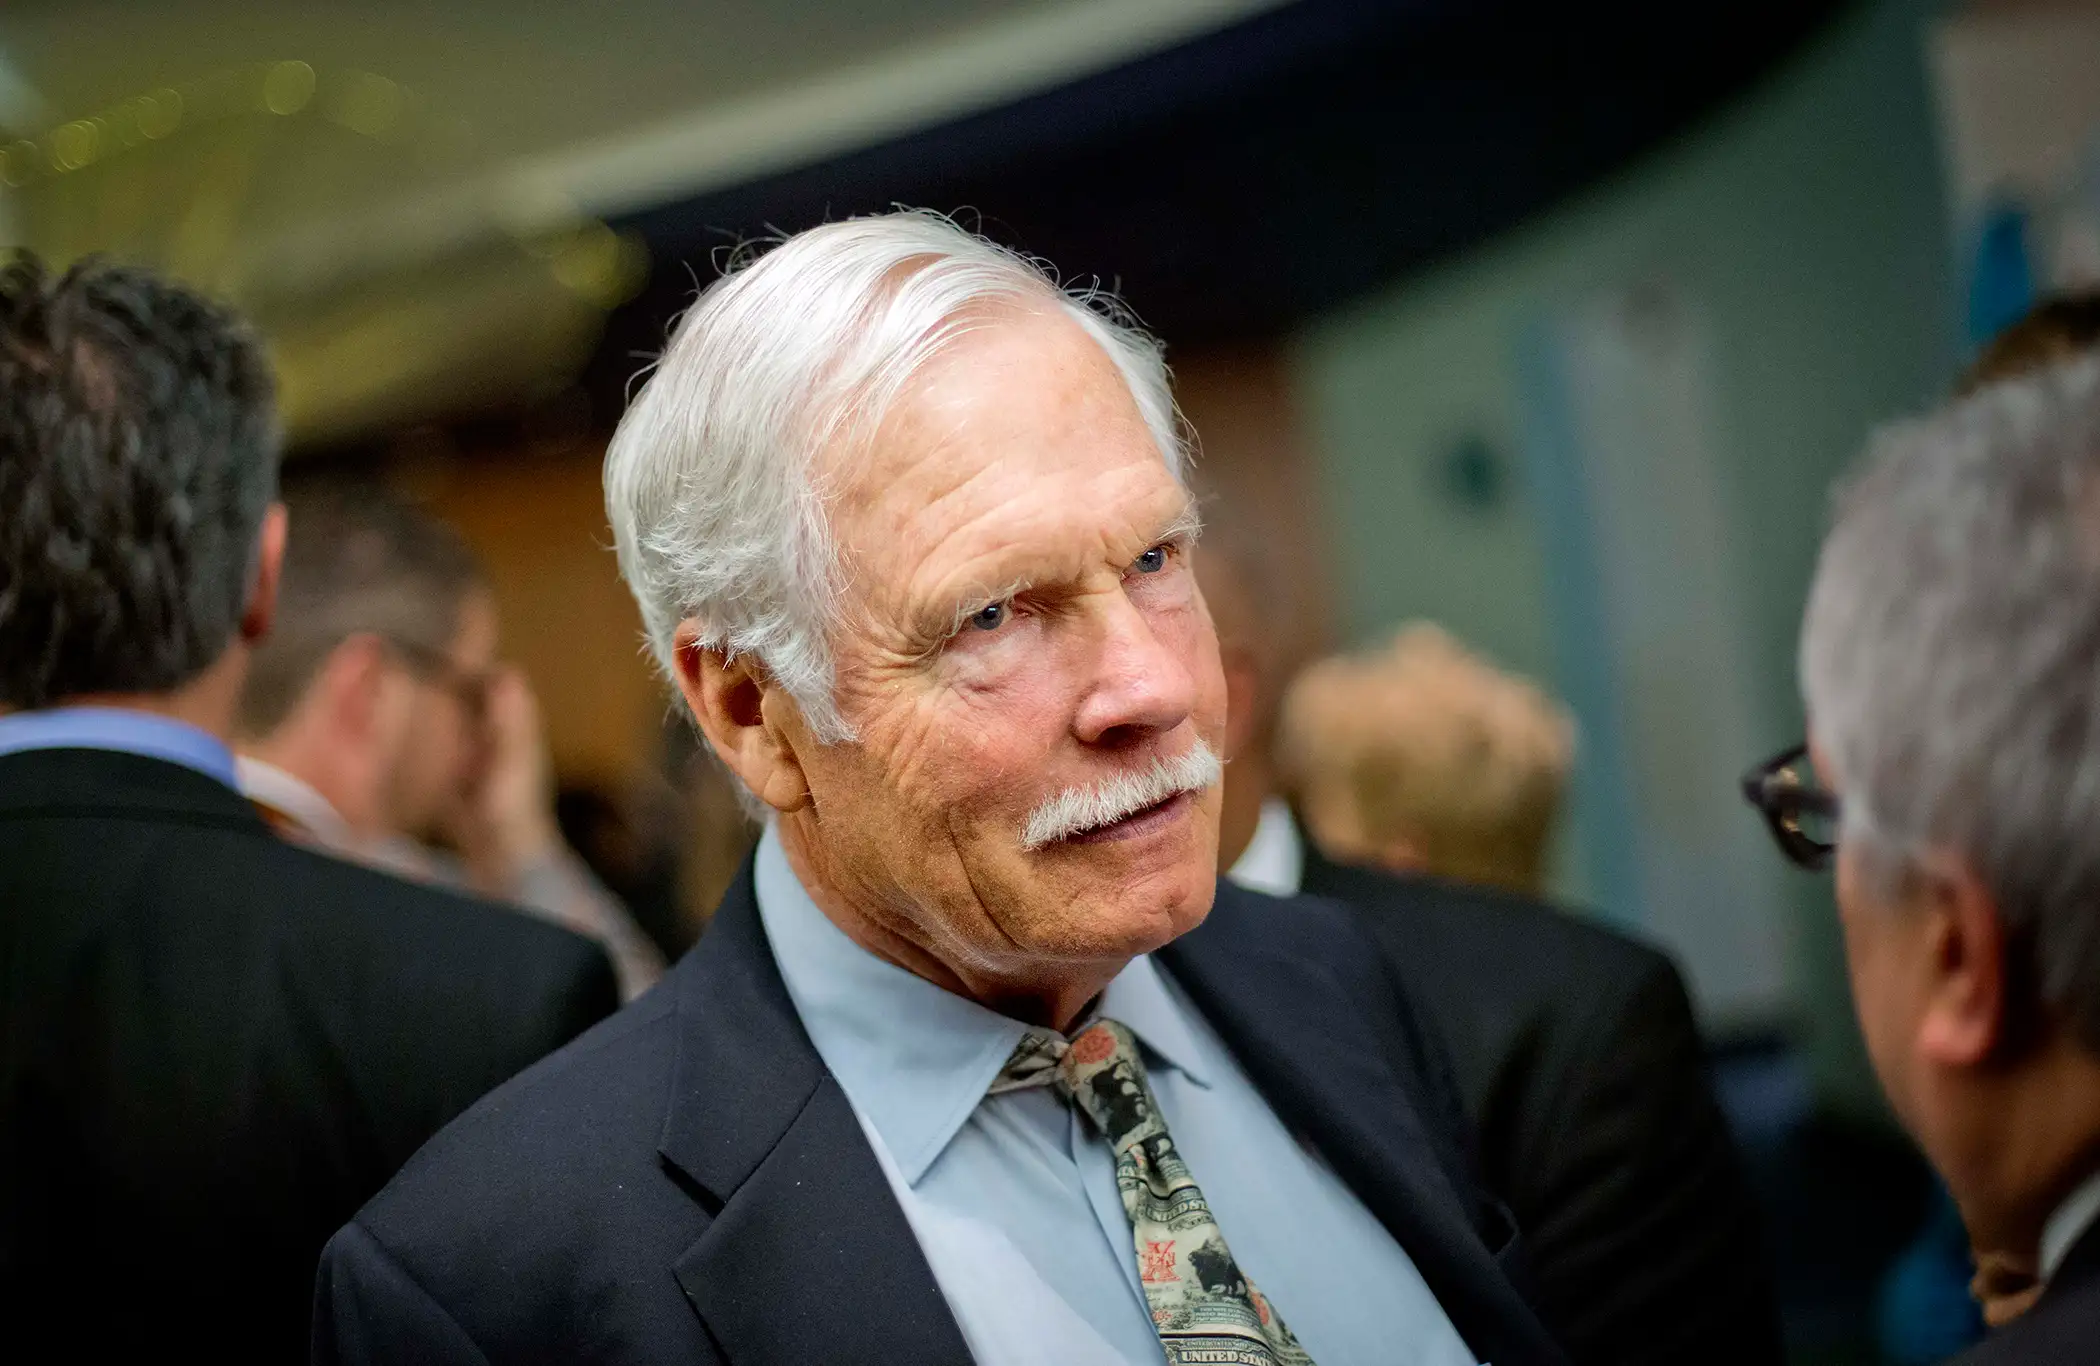 In this Friday, Dec. 6, 2013 photo, Ted Turner talks with guests at the Captain Planet Foundation benefit gala in Atlanta.